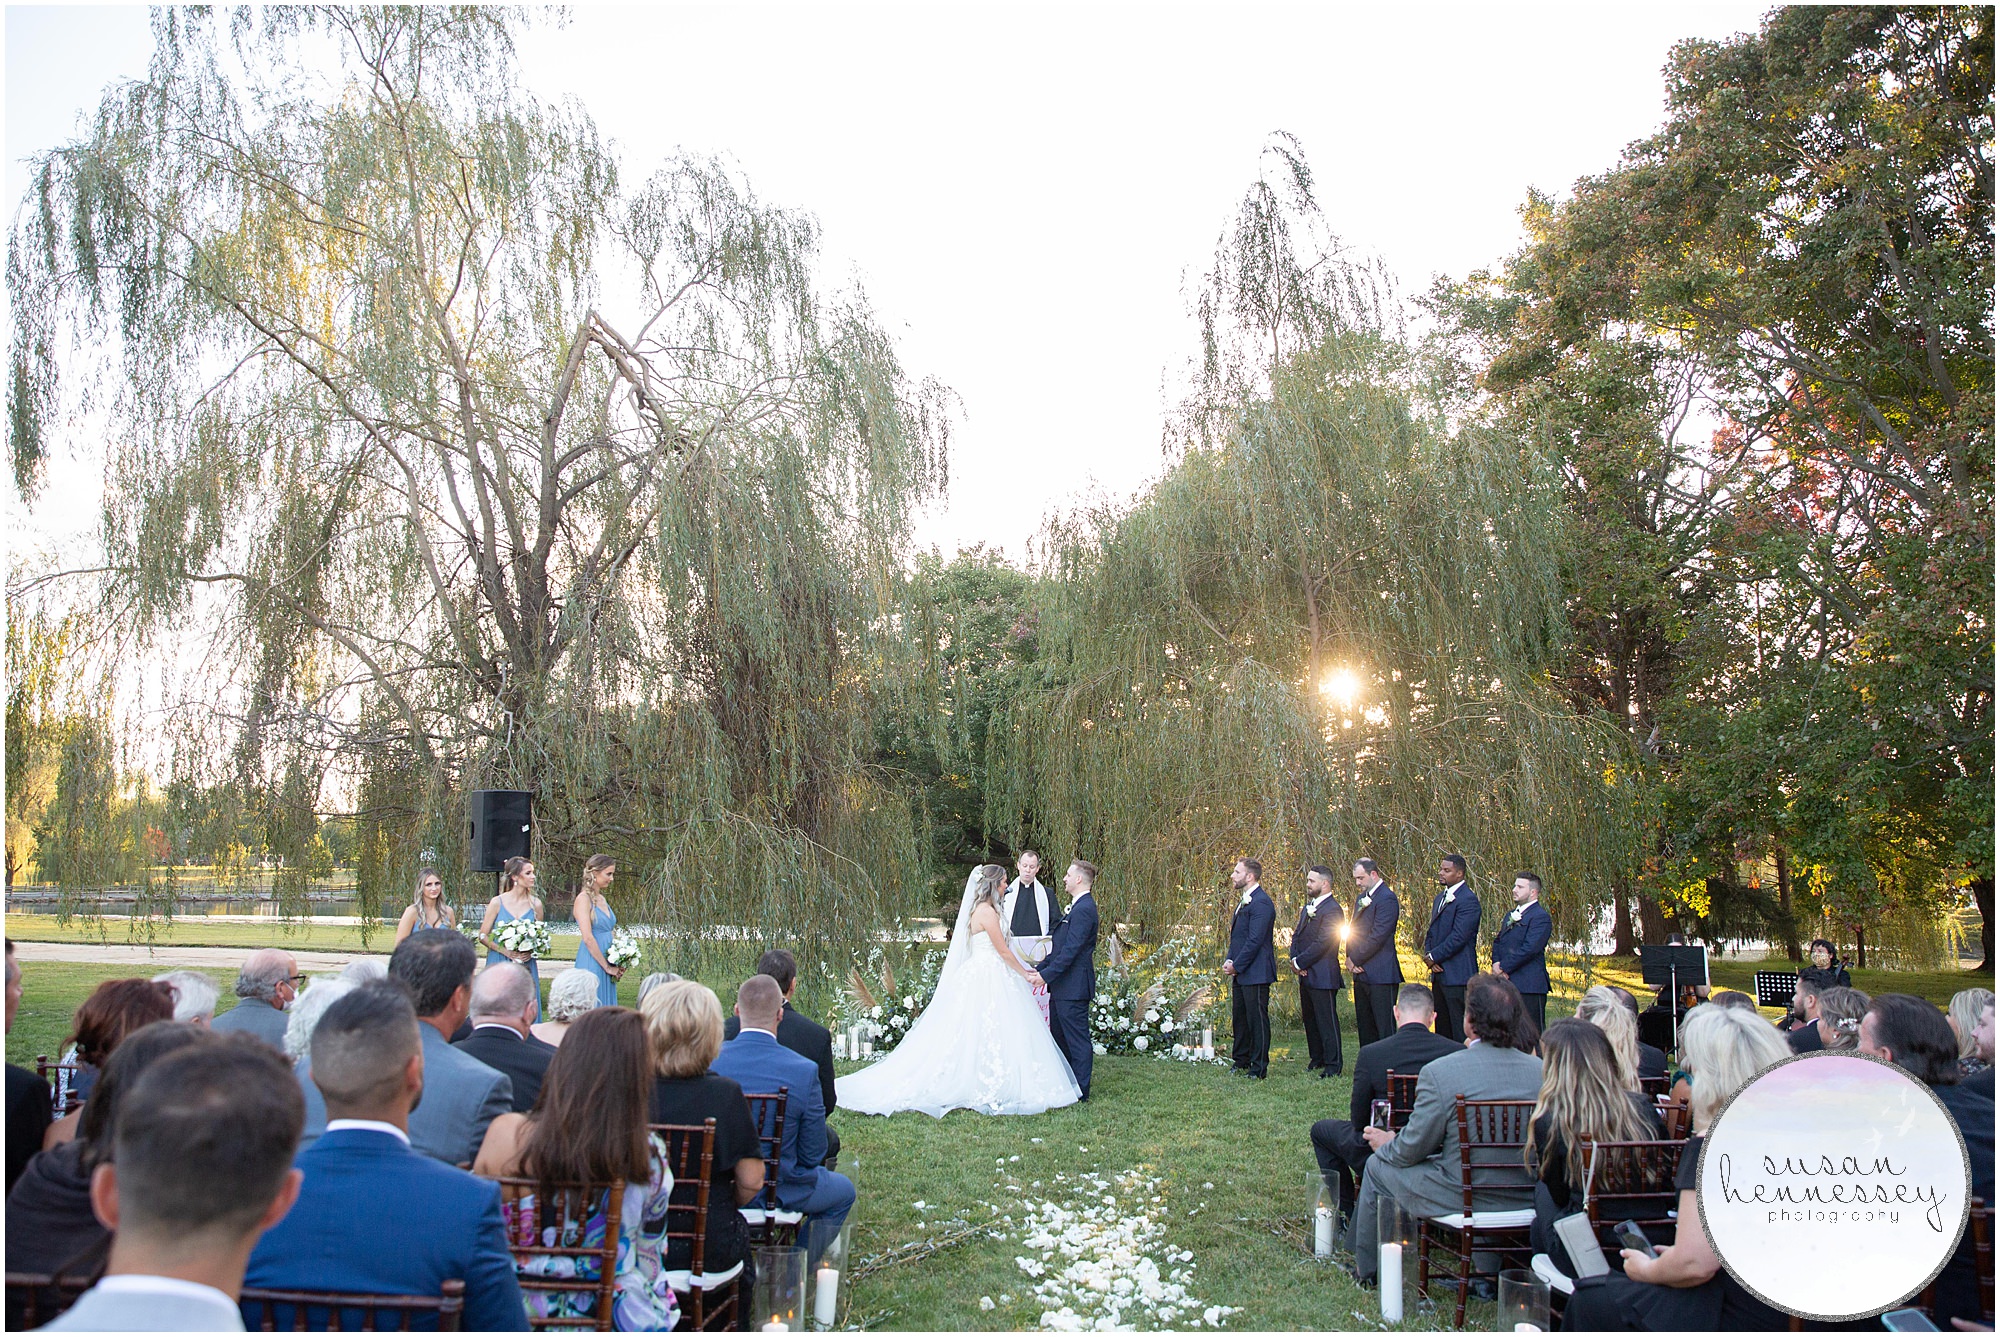 Ceremony in the willow trees during sunset at Windows on the Water at Frogbridge Wedding